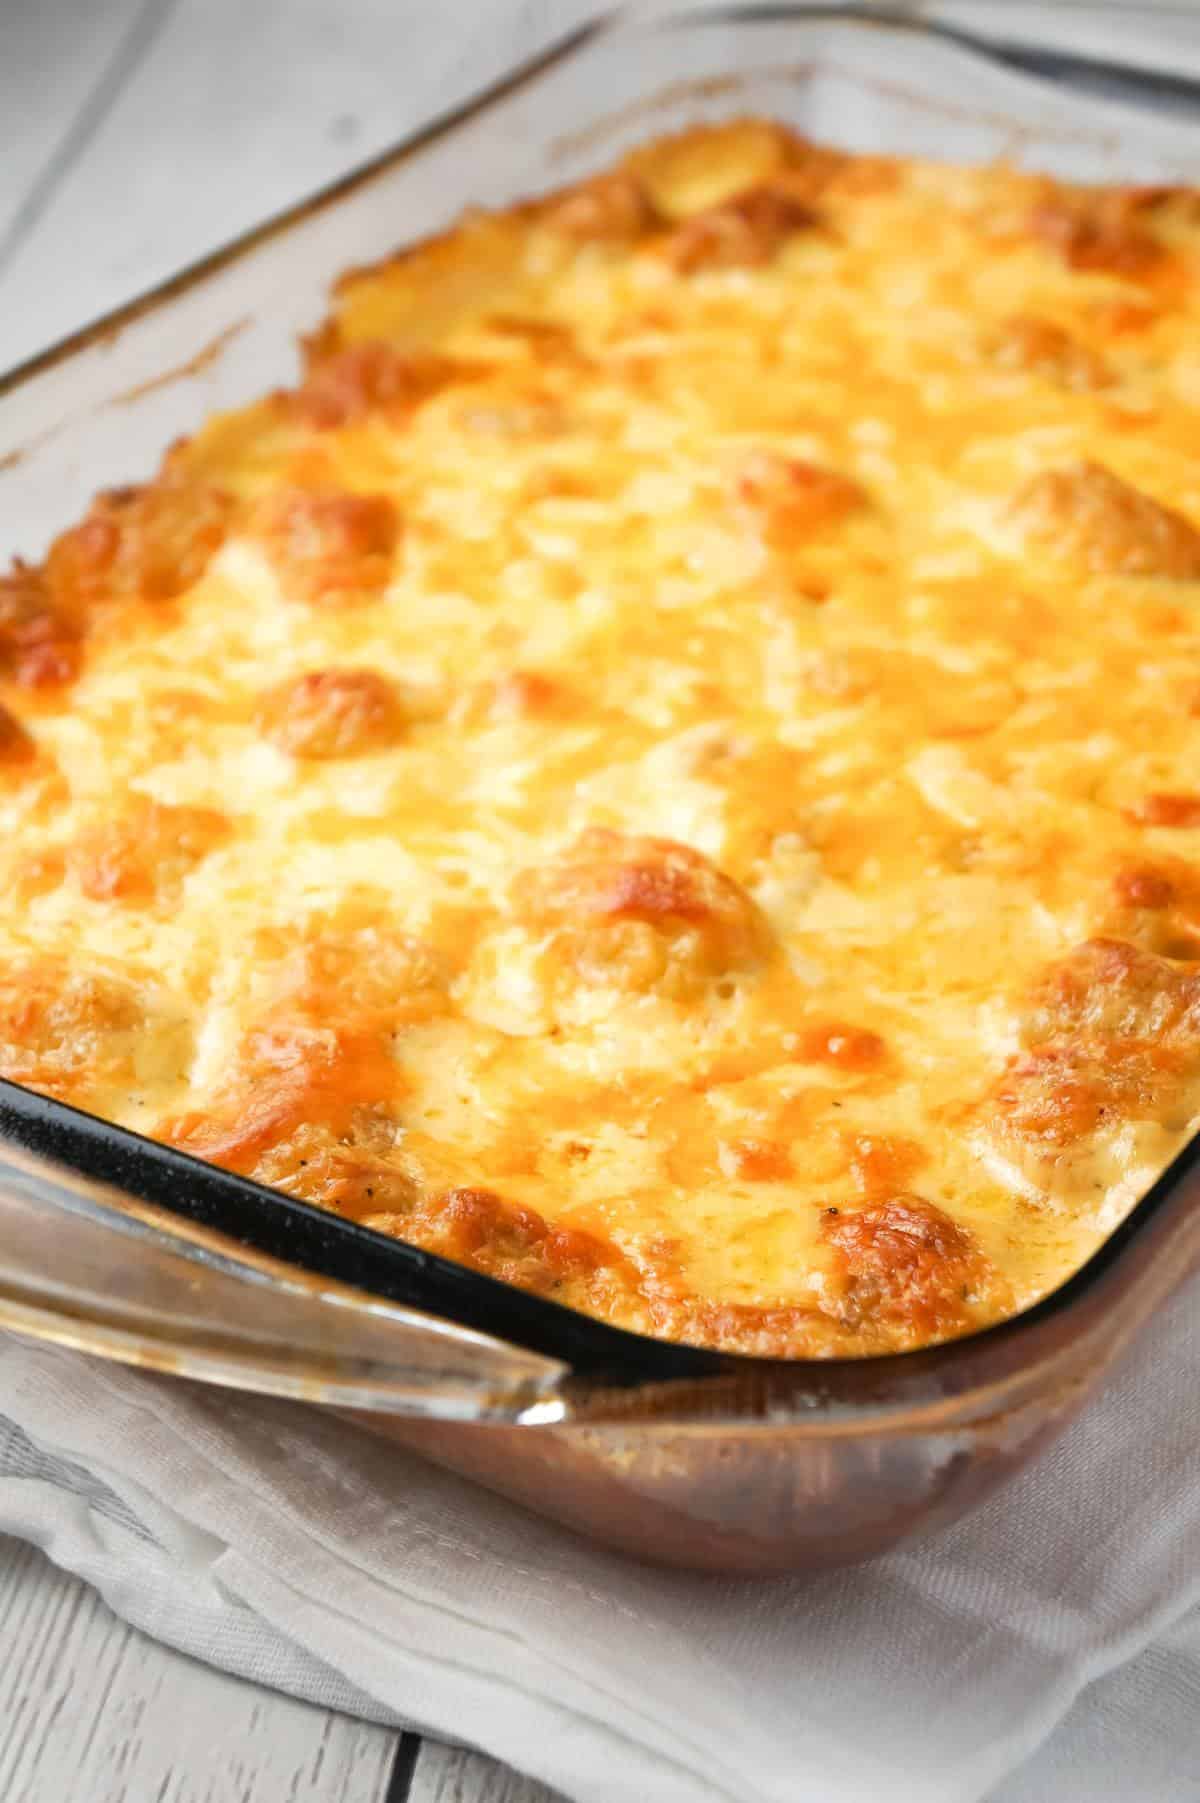 Cheesy Garlic Tater Tot Casserole is an easy potato side dish recipe using heavy cream, cheddar cheese soup, frozen tater tots, garlic puree and shredded mozzarella, cheddar and Parmesan cheese.